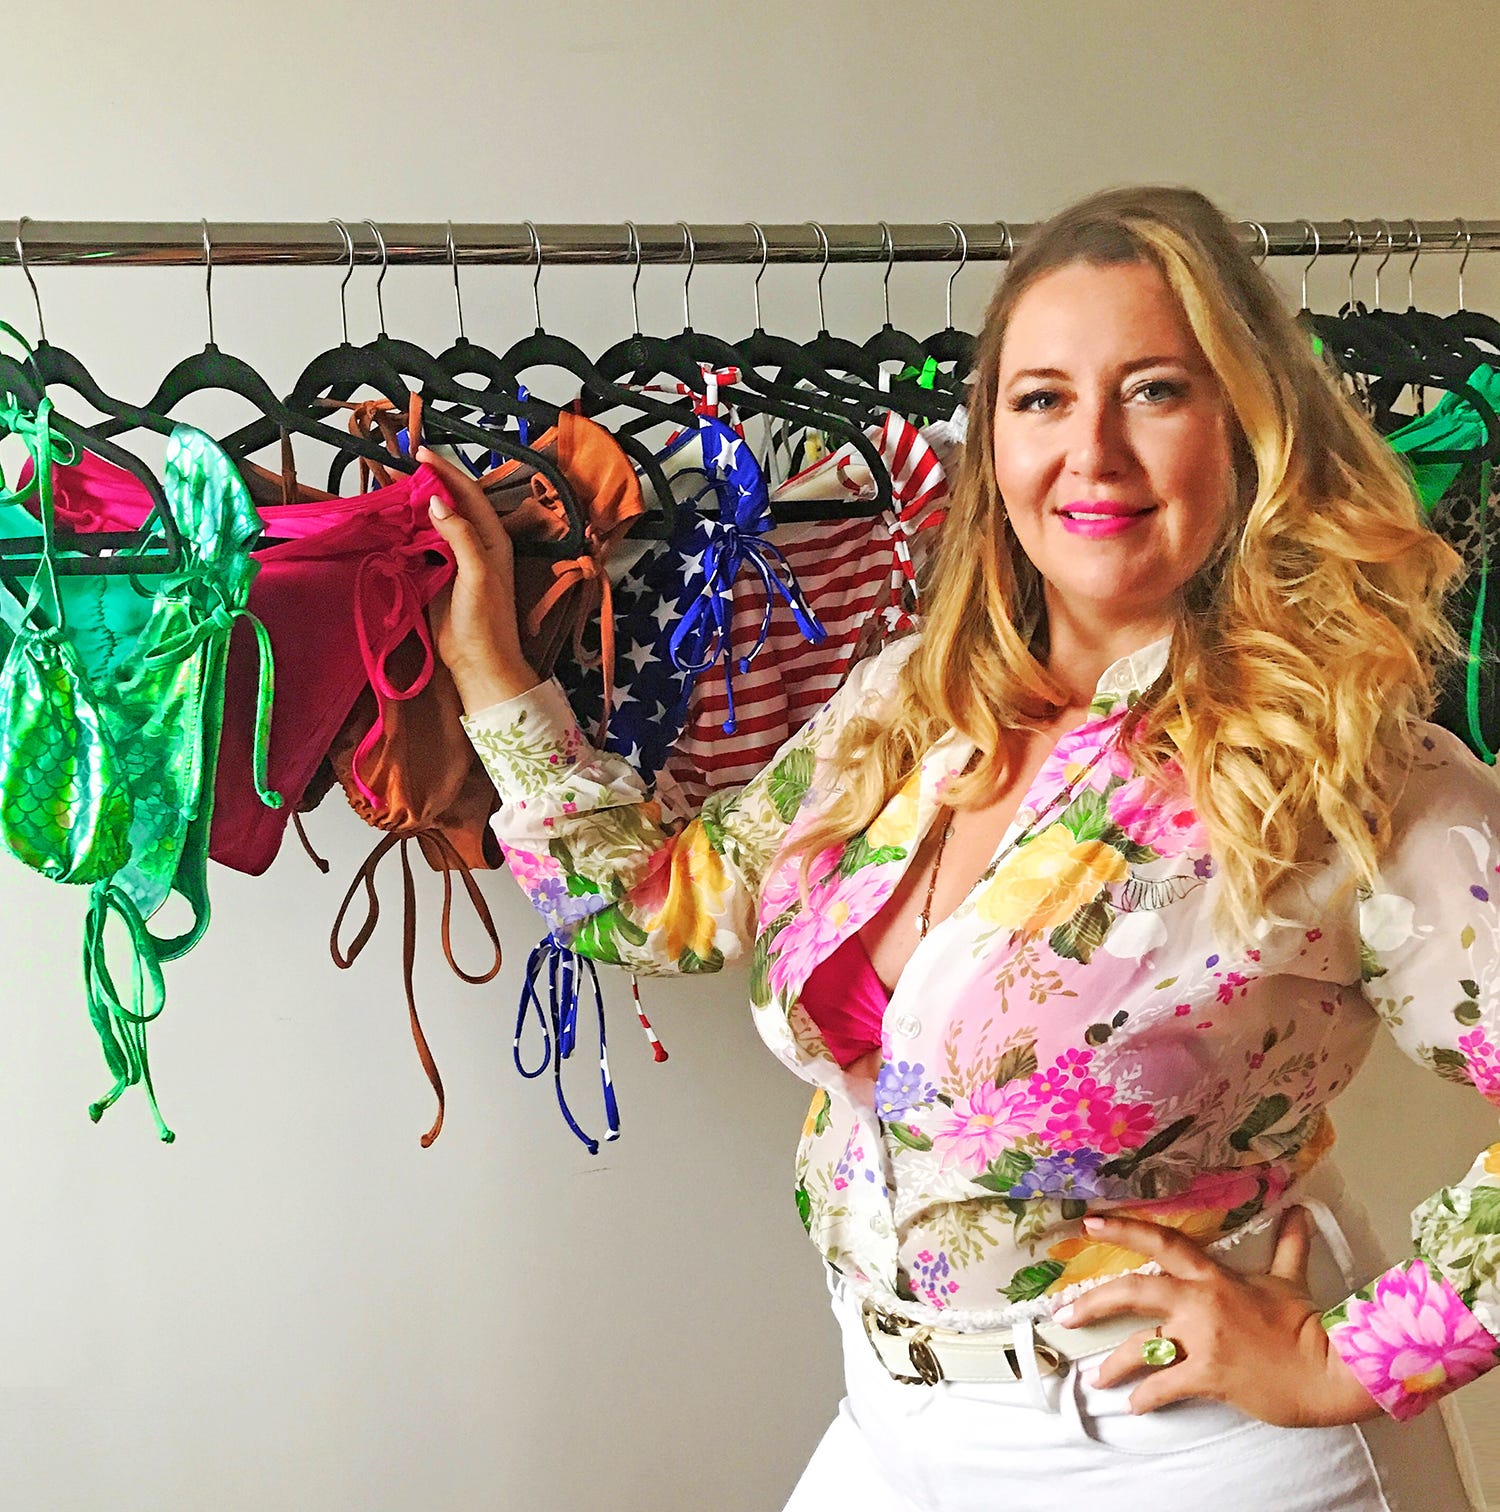 You Will Have To Humble Yourself” 5 Startup Tips With Elizabeth Taylor  Founder of Curvy Beach, by Authority Magazine Editorial Staff, Authority  Magazine